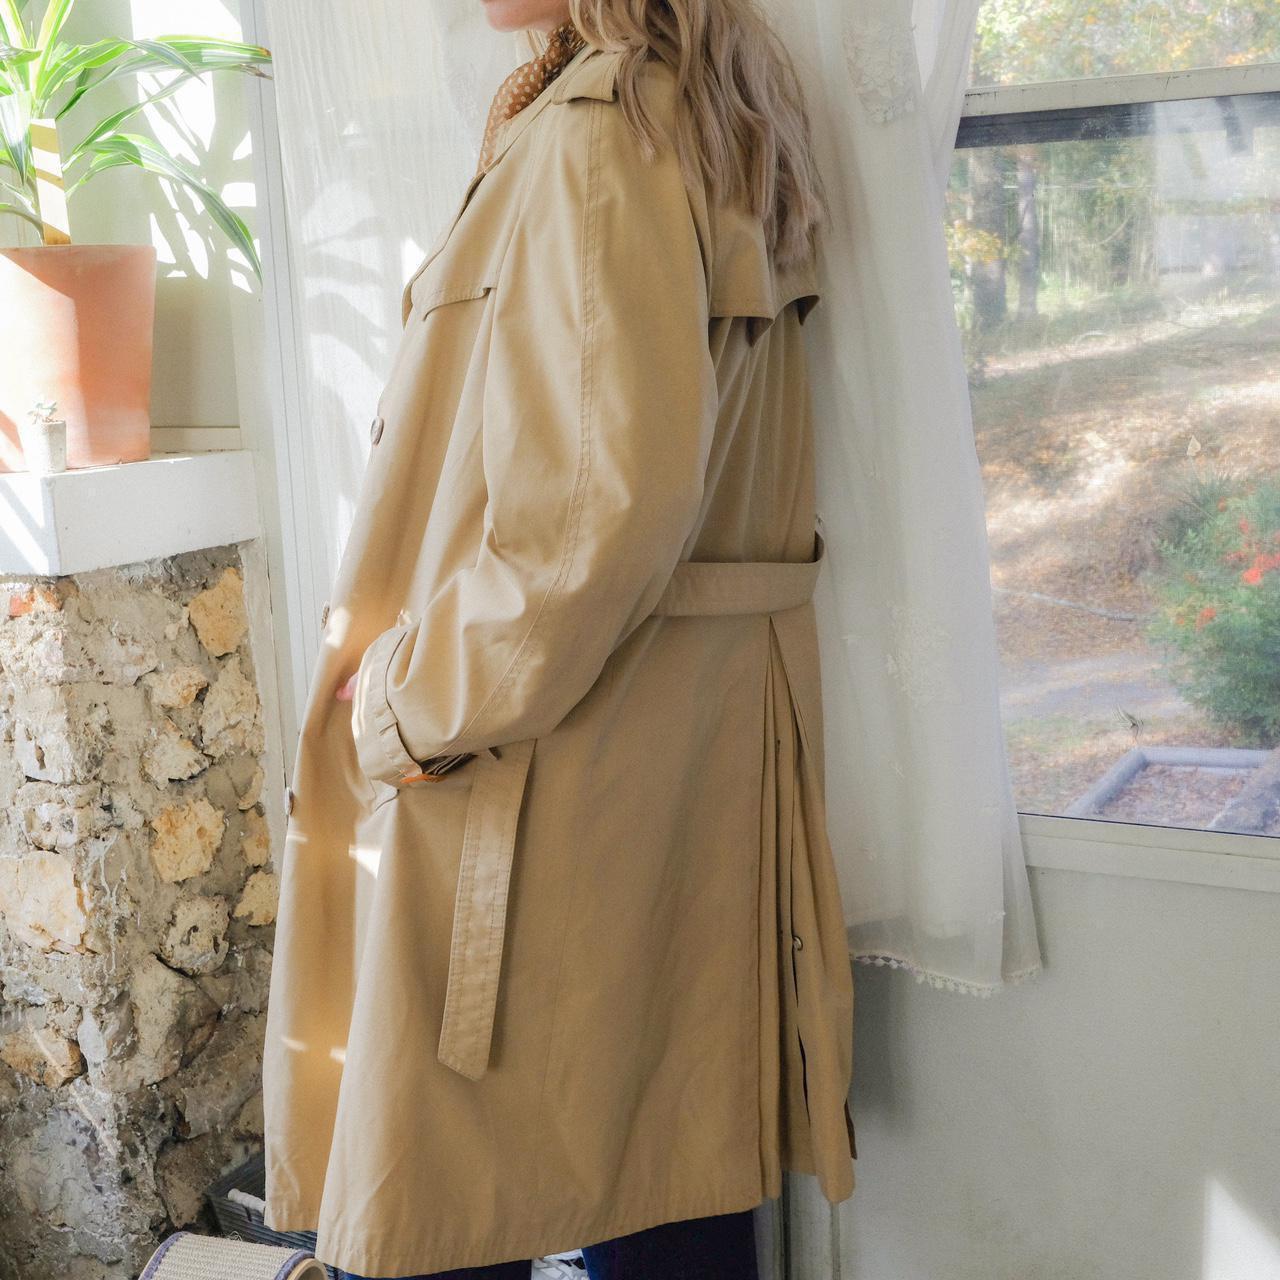 Product Image 4 - Vintage tan trench coat. Feels